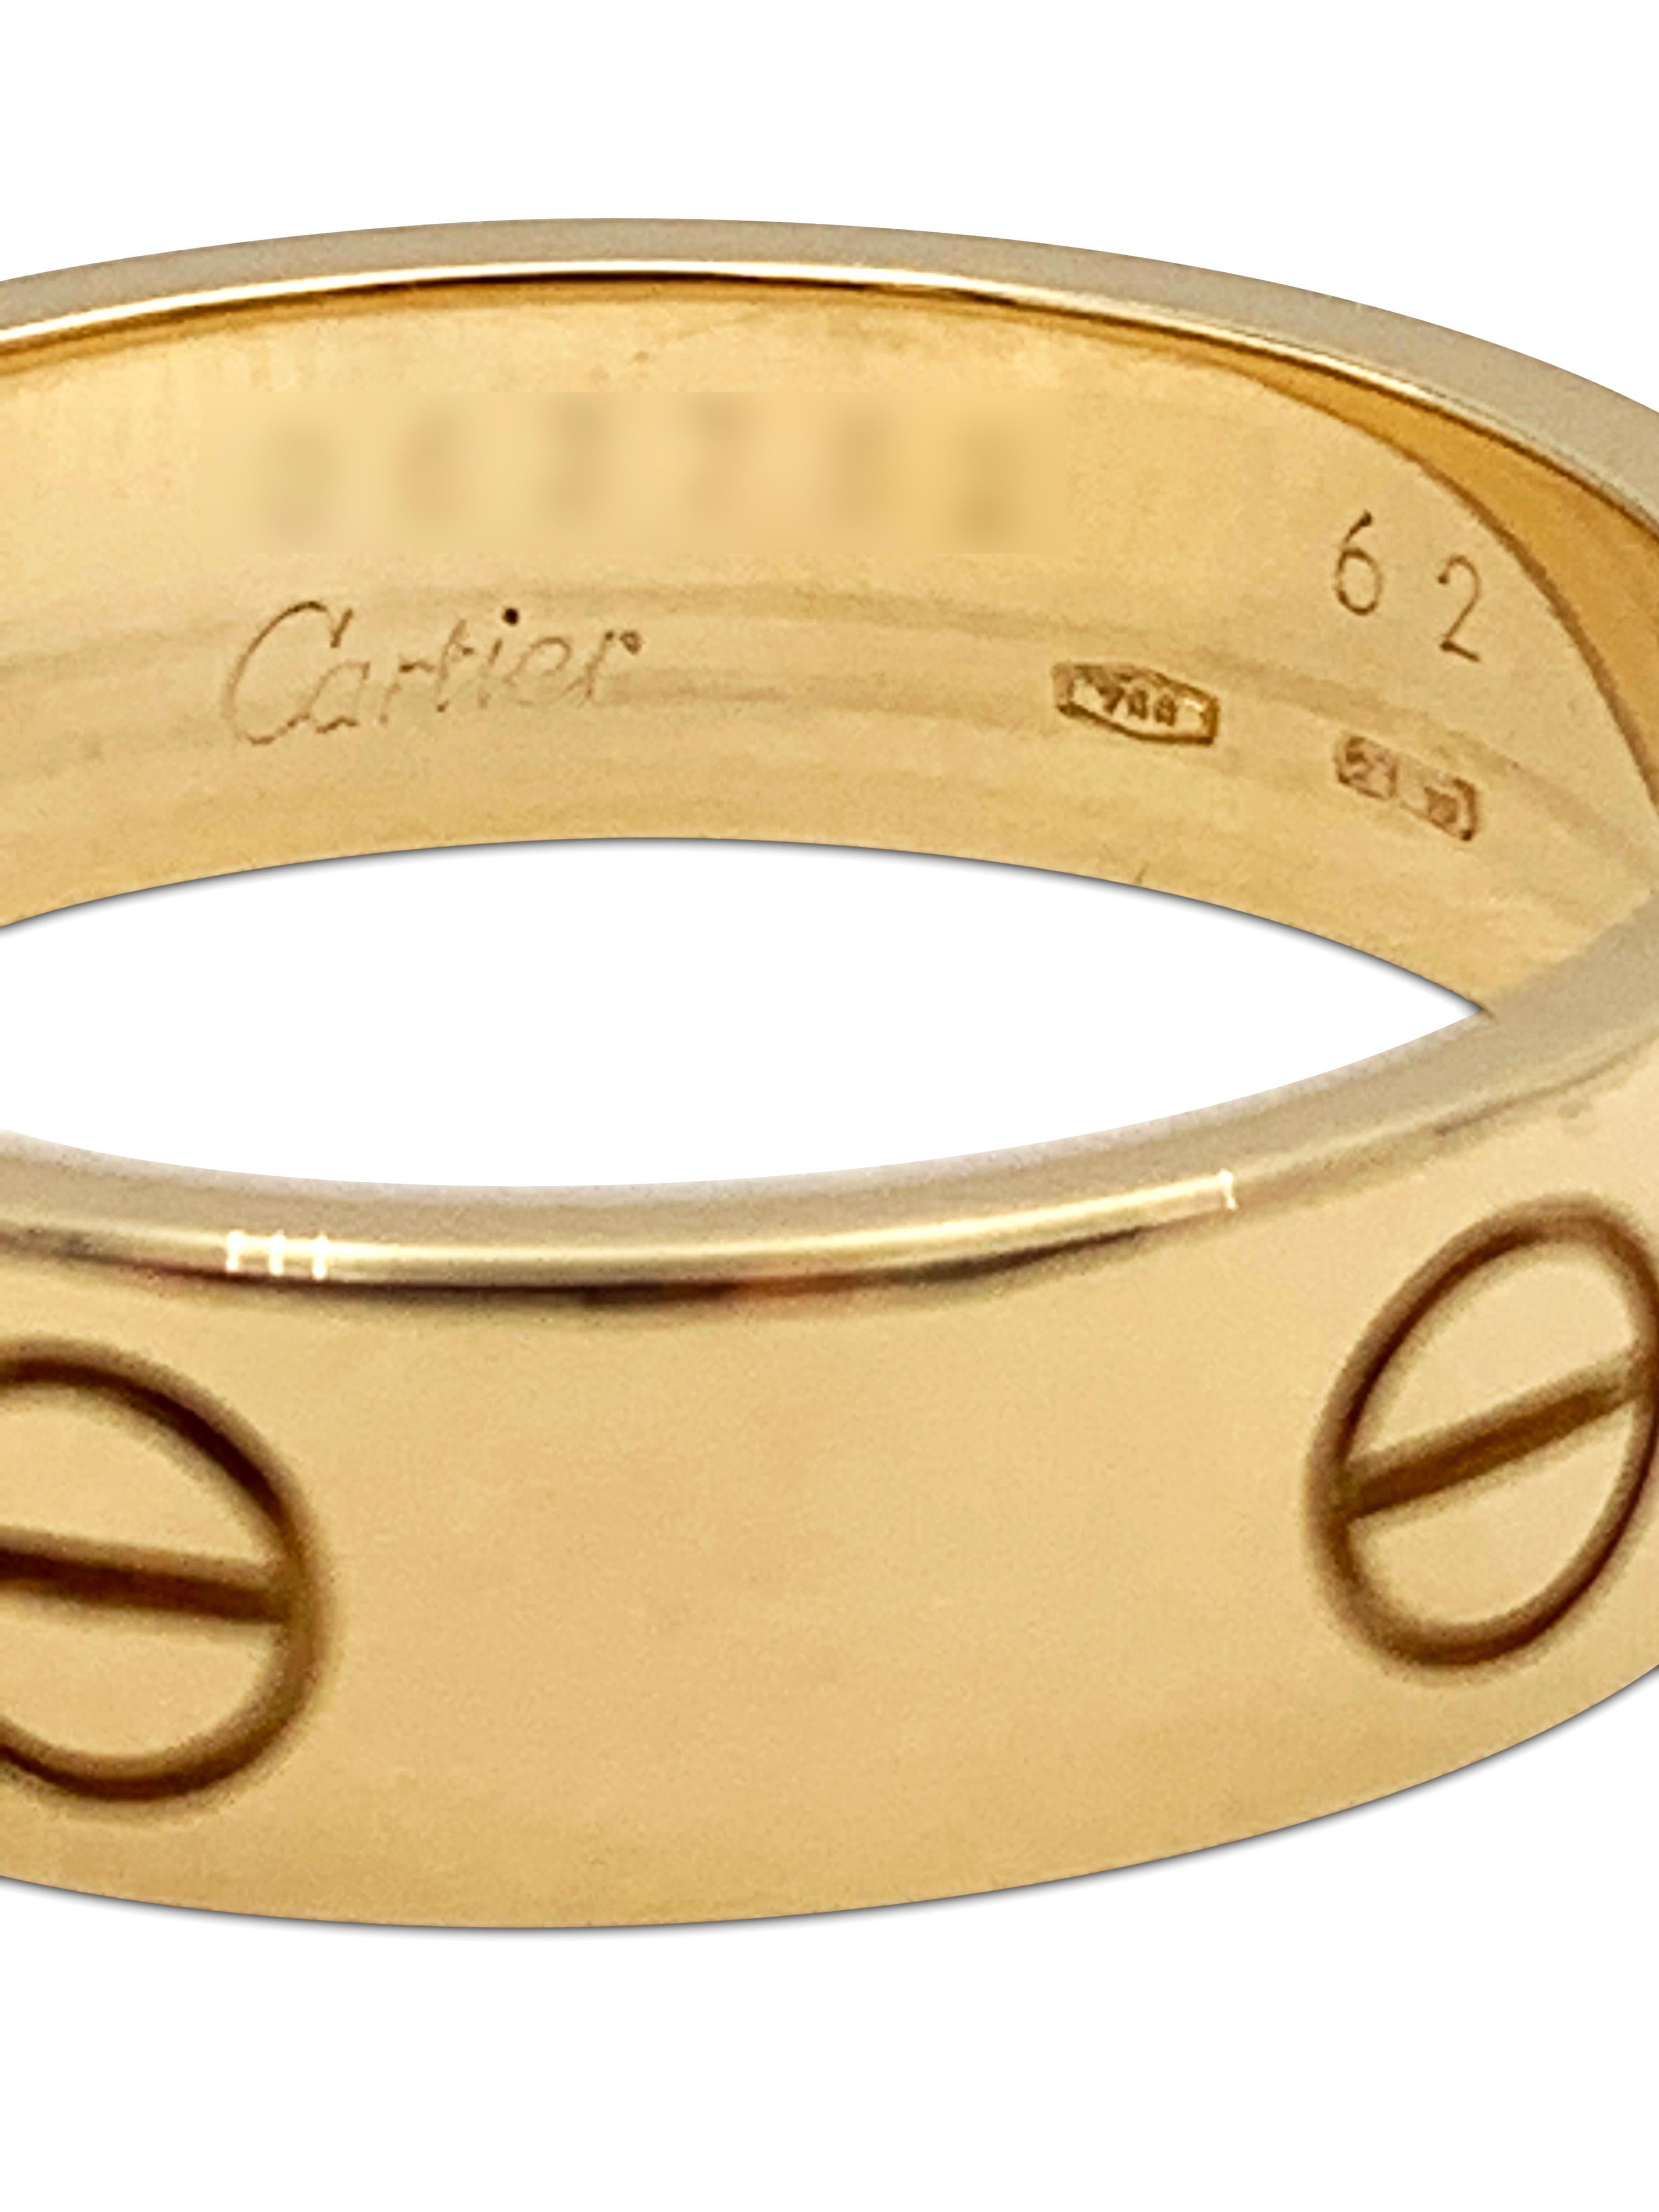 Authentic Cartier Love ring crafted in 18 karat yellow gold. Ring size 62 (US 10). Signed Cartier, 750, with serial number and hallmarks. The ring is not presented with original box or papers. CIRCA 2010s. 